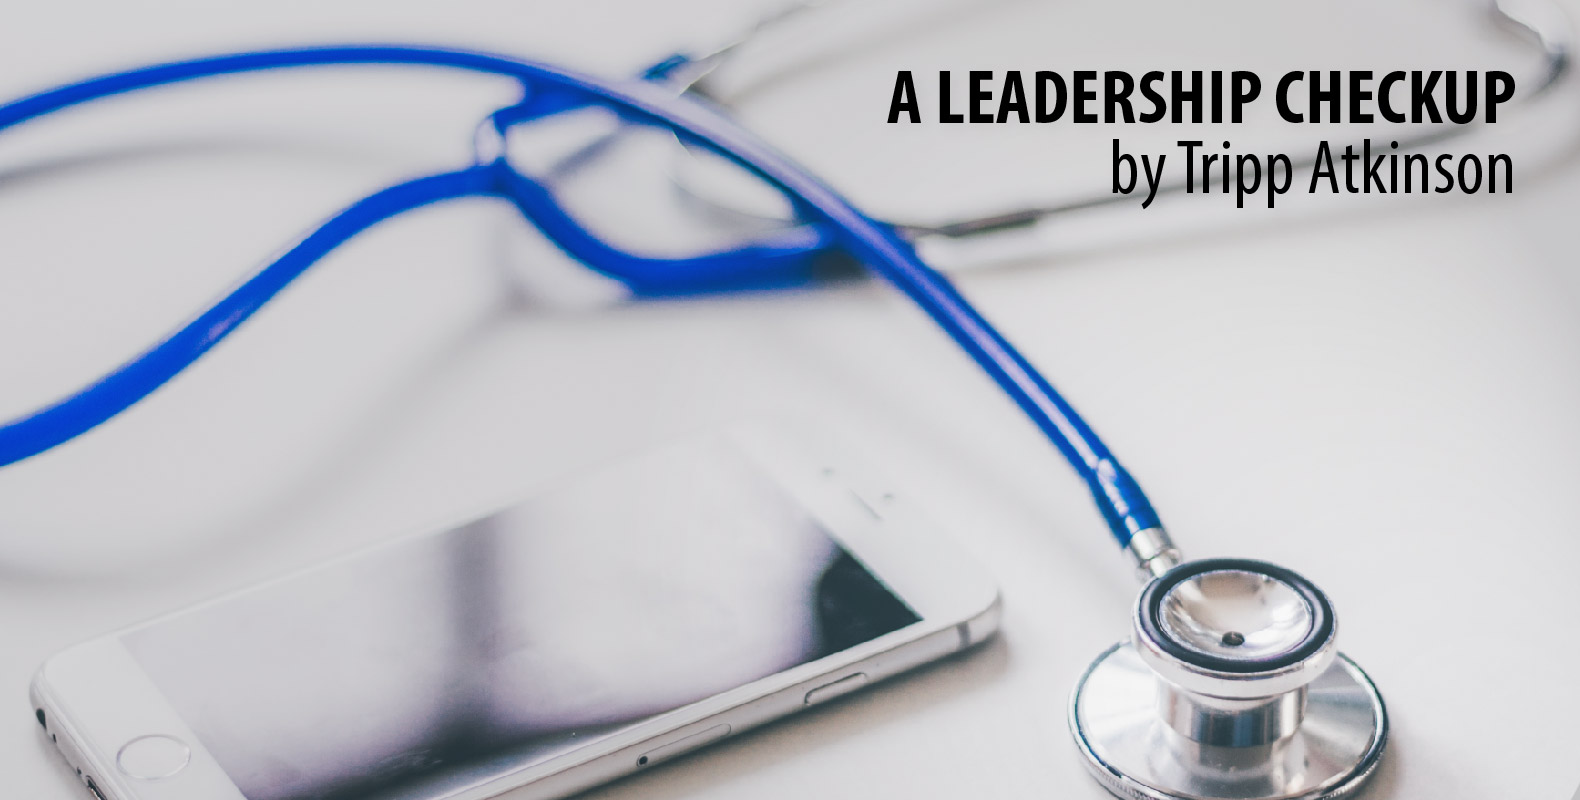 A Leadership Checkup (A health evaluation of effective leaders) by Tripp Atkinson